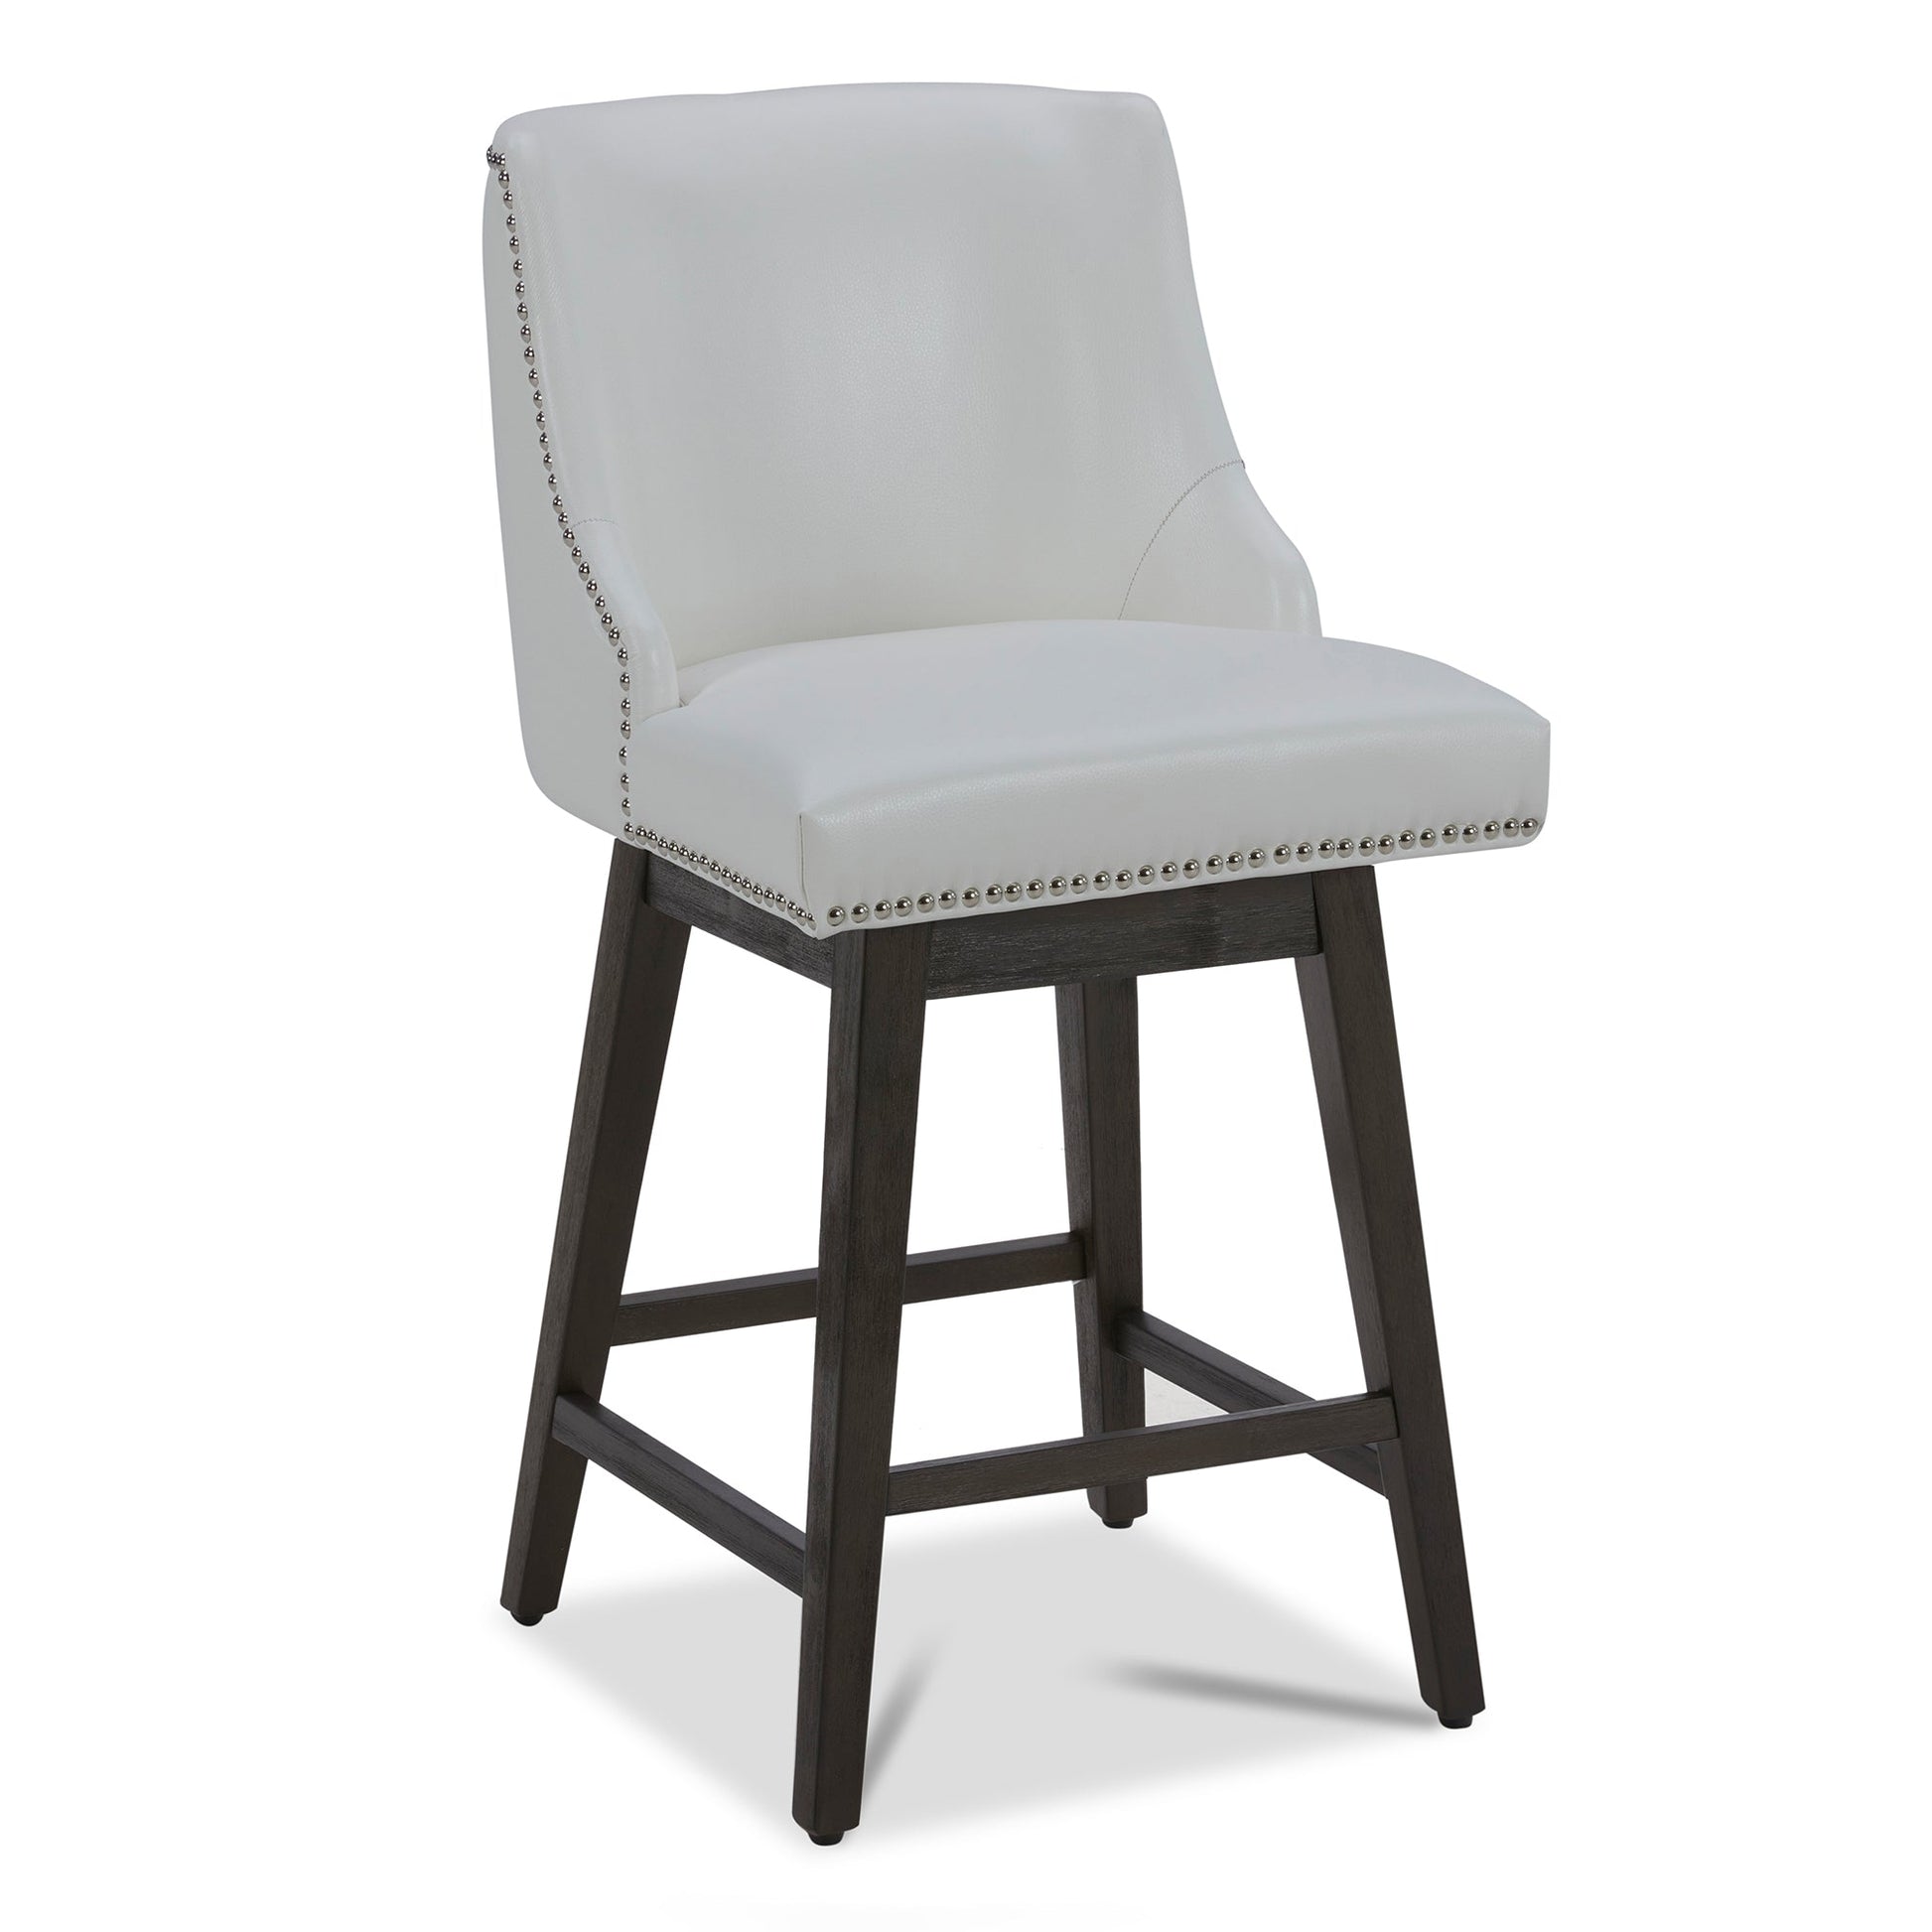 CHITA LIVING-Asher Swivel Counter Stool with Nailhead Trim-Counter Stools-Faux Leather-White-